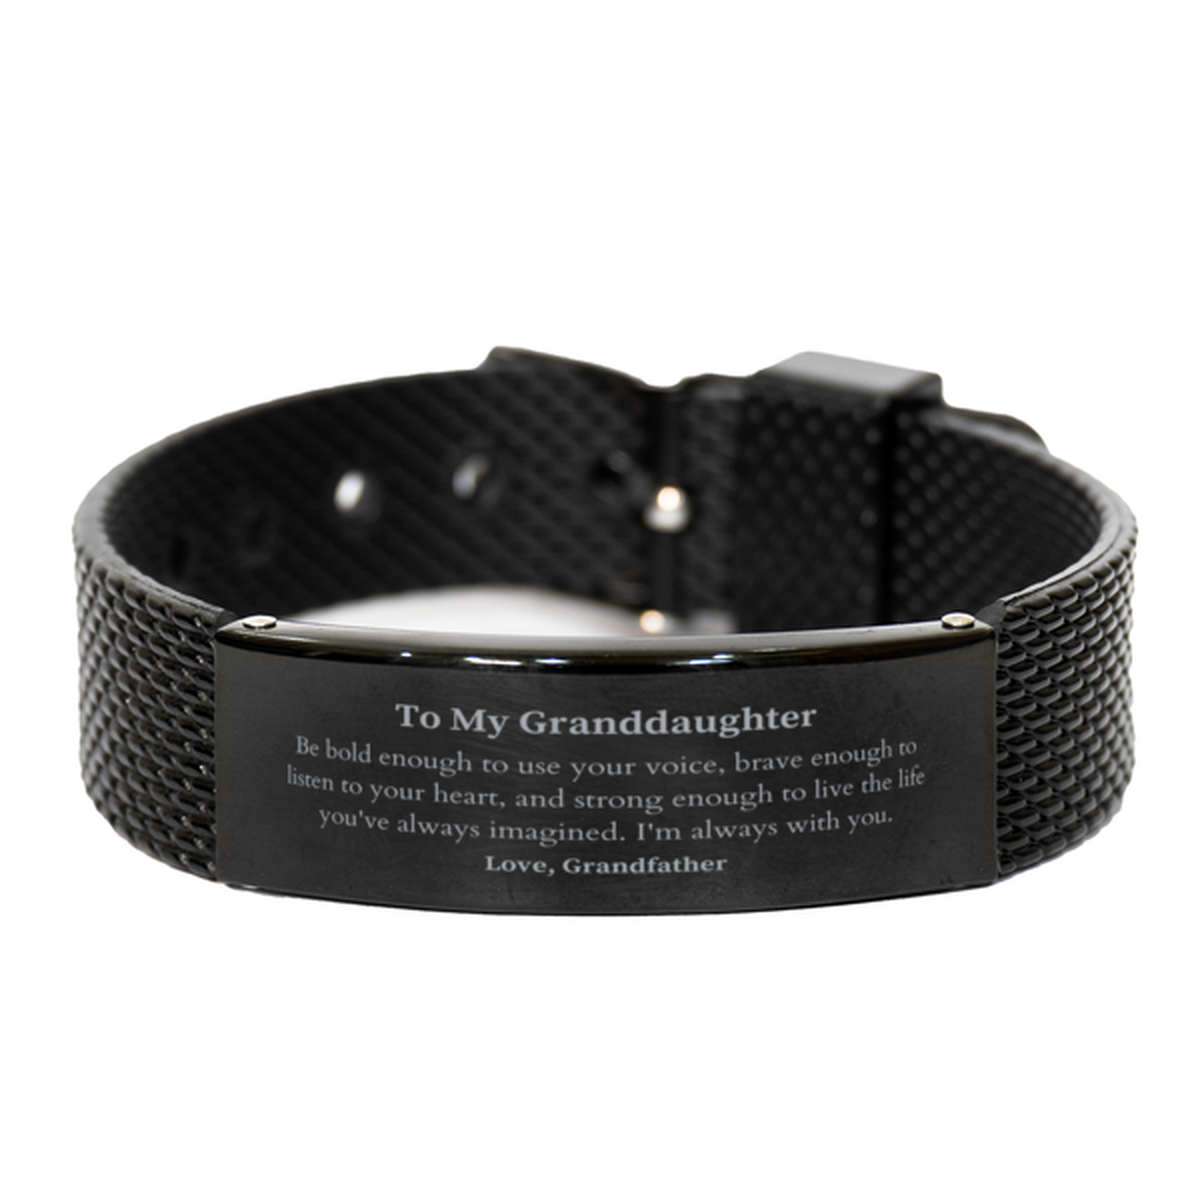 Keepsake Granddaughter Black Shark Mesh Bracelet Gift Idea Graduation Christmas Birthday Granddaughter from Grandfather, Granddaughter Be bold enough to use your voice, brave enough to listen to your heart. Love, Grandfather